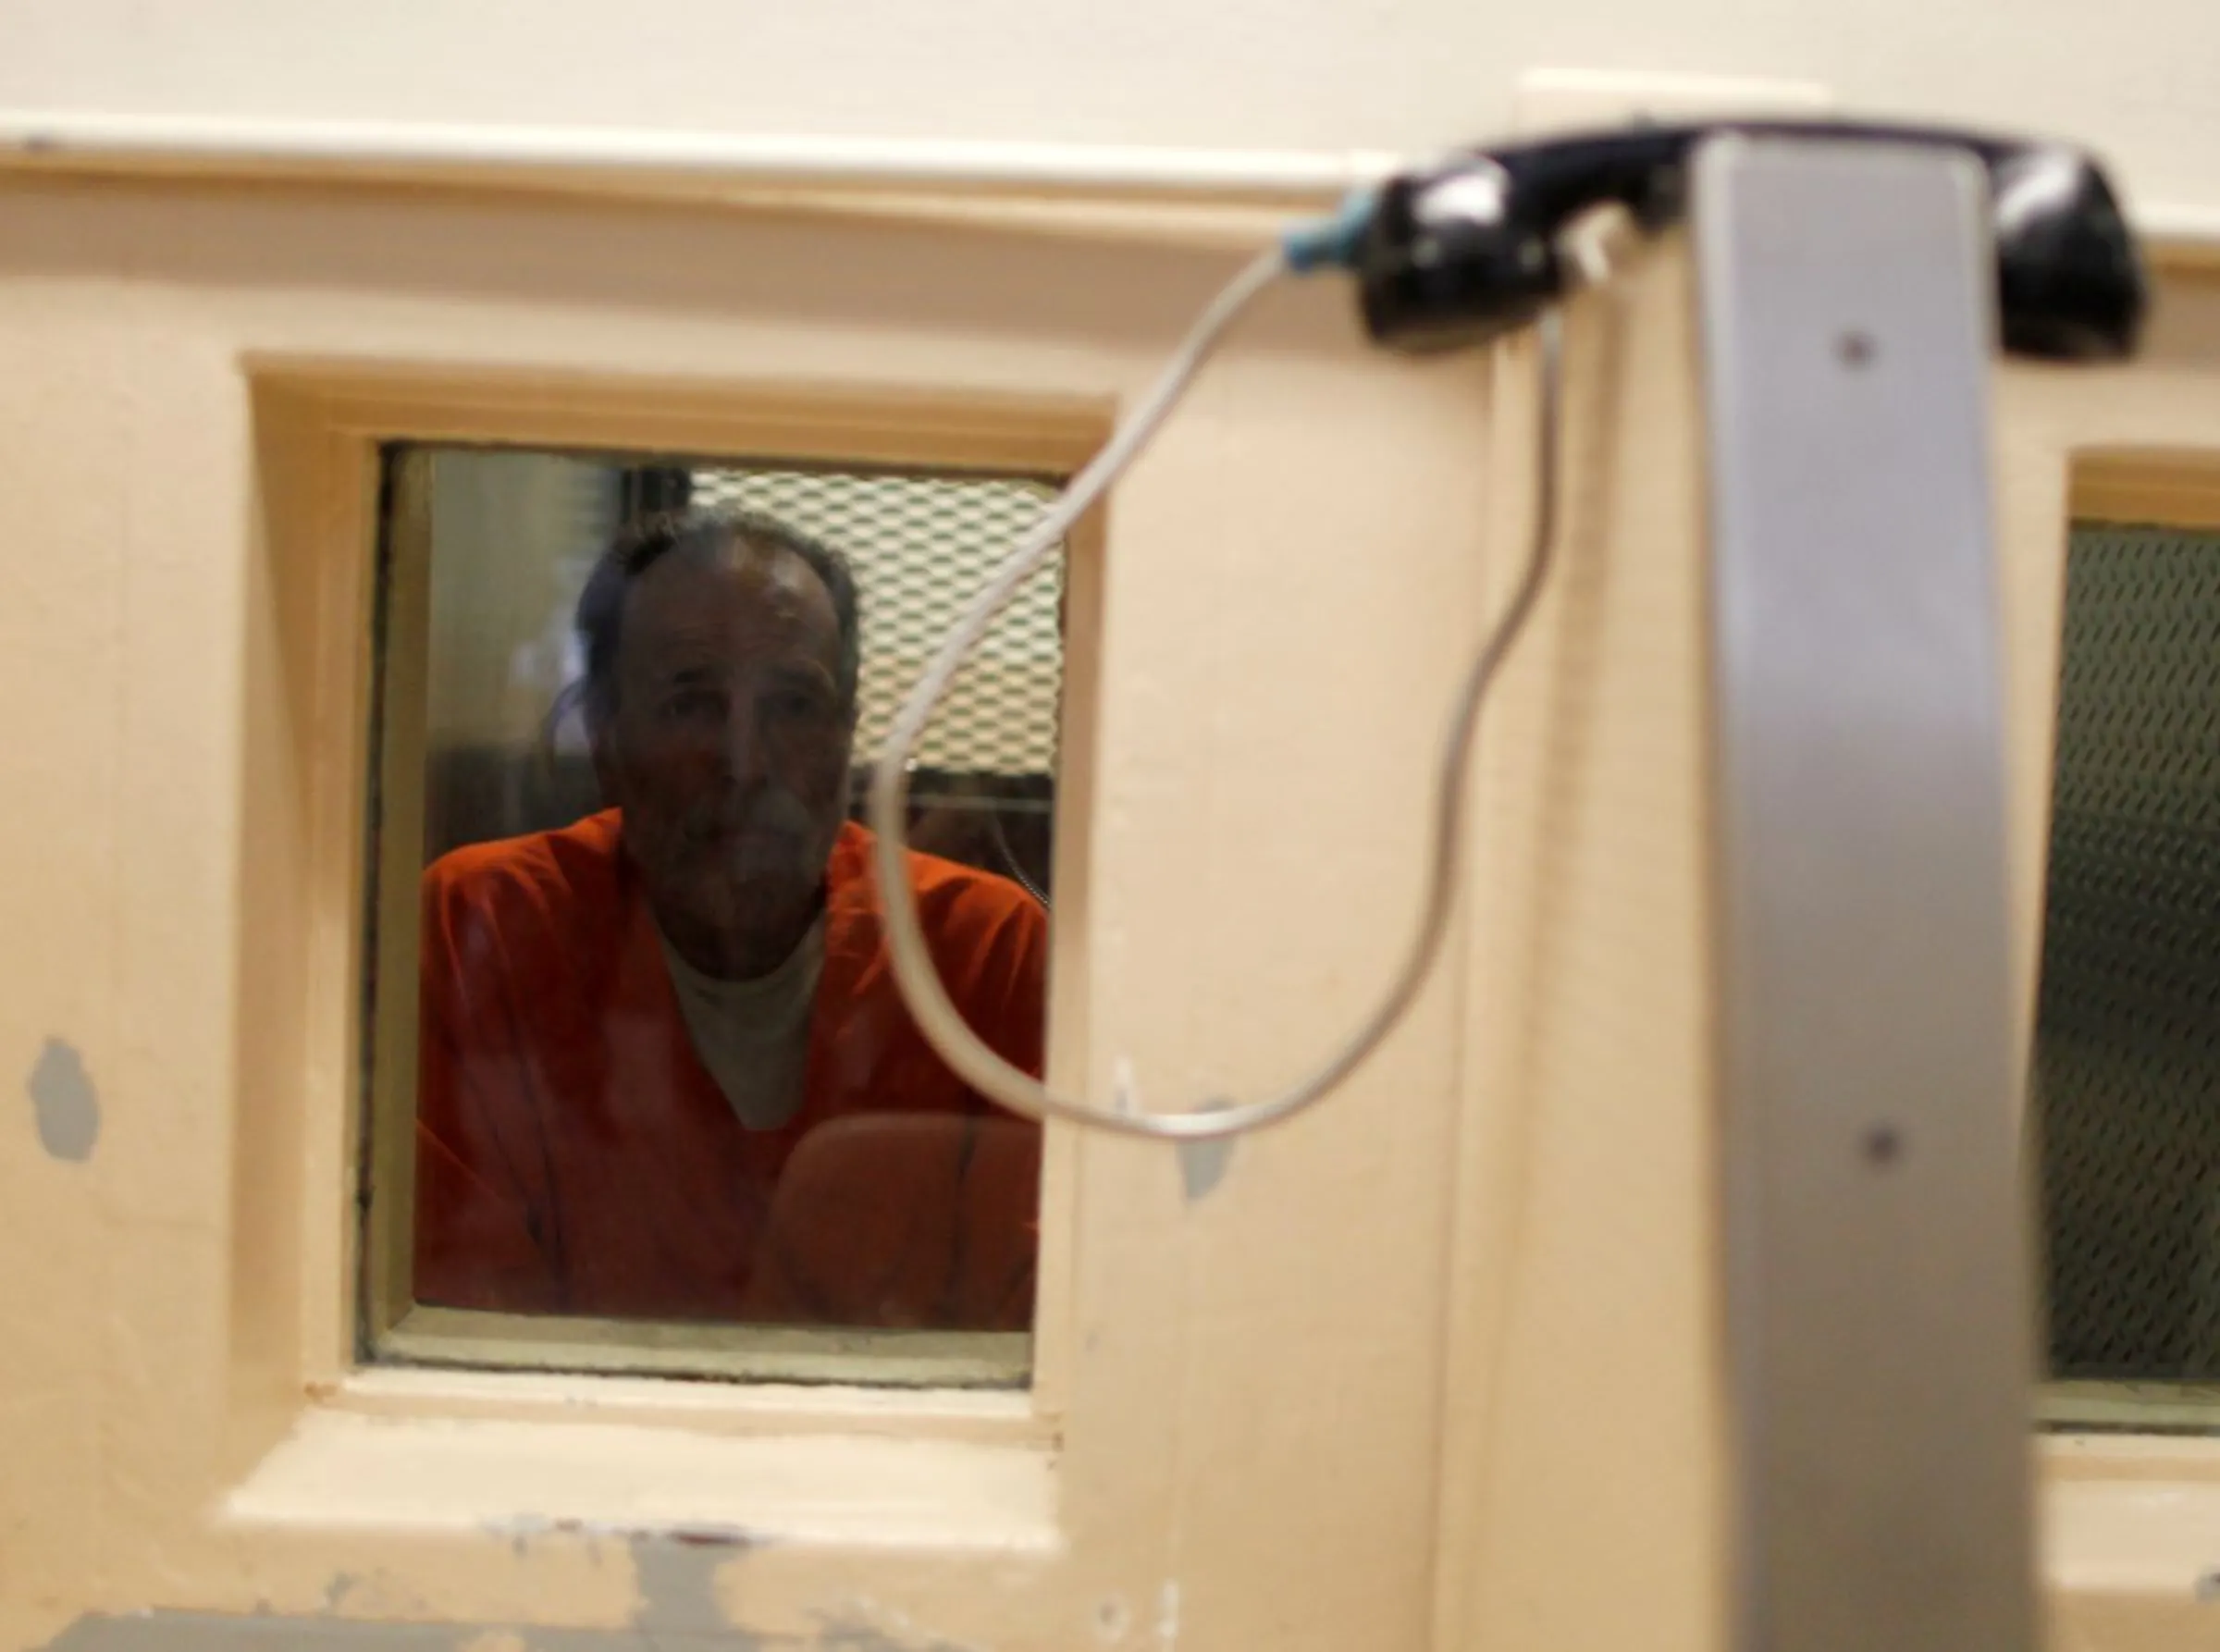 An inmate waits for a visitor at a state prison in Chino, California, June 3, 2011. REUTERS/Lucy Nicholson